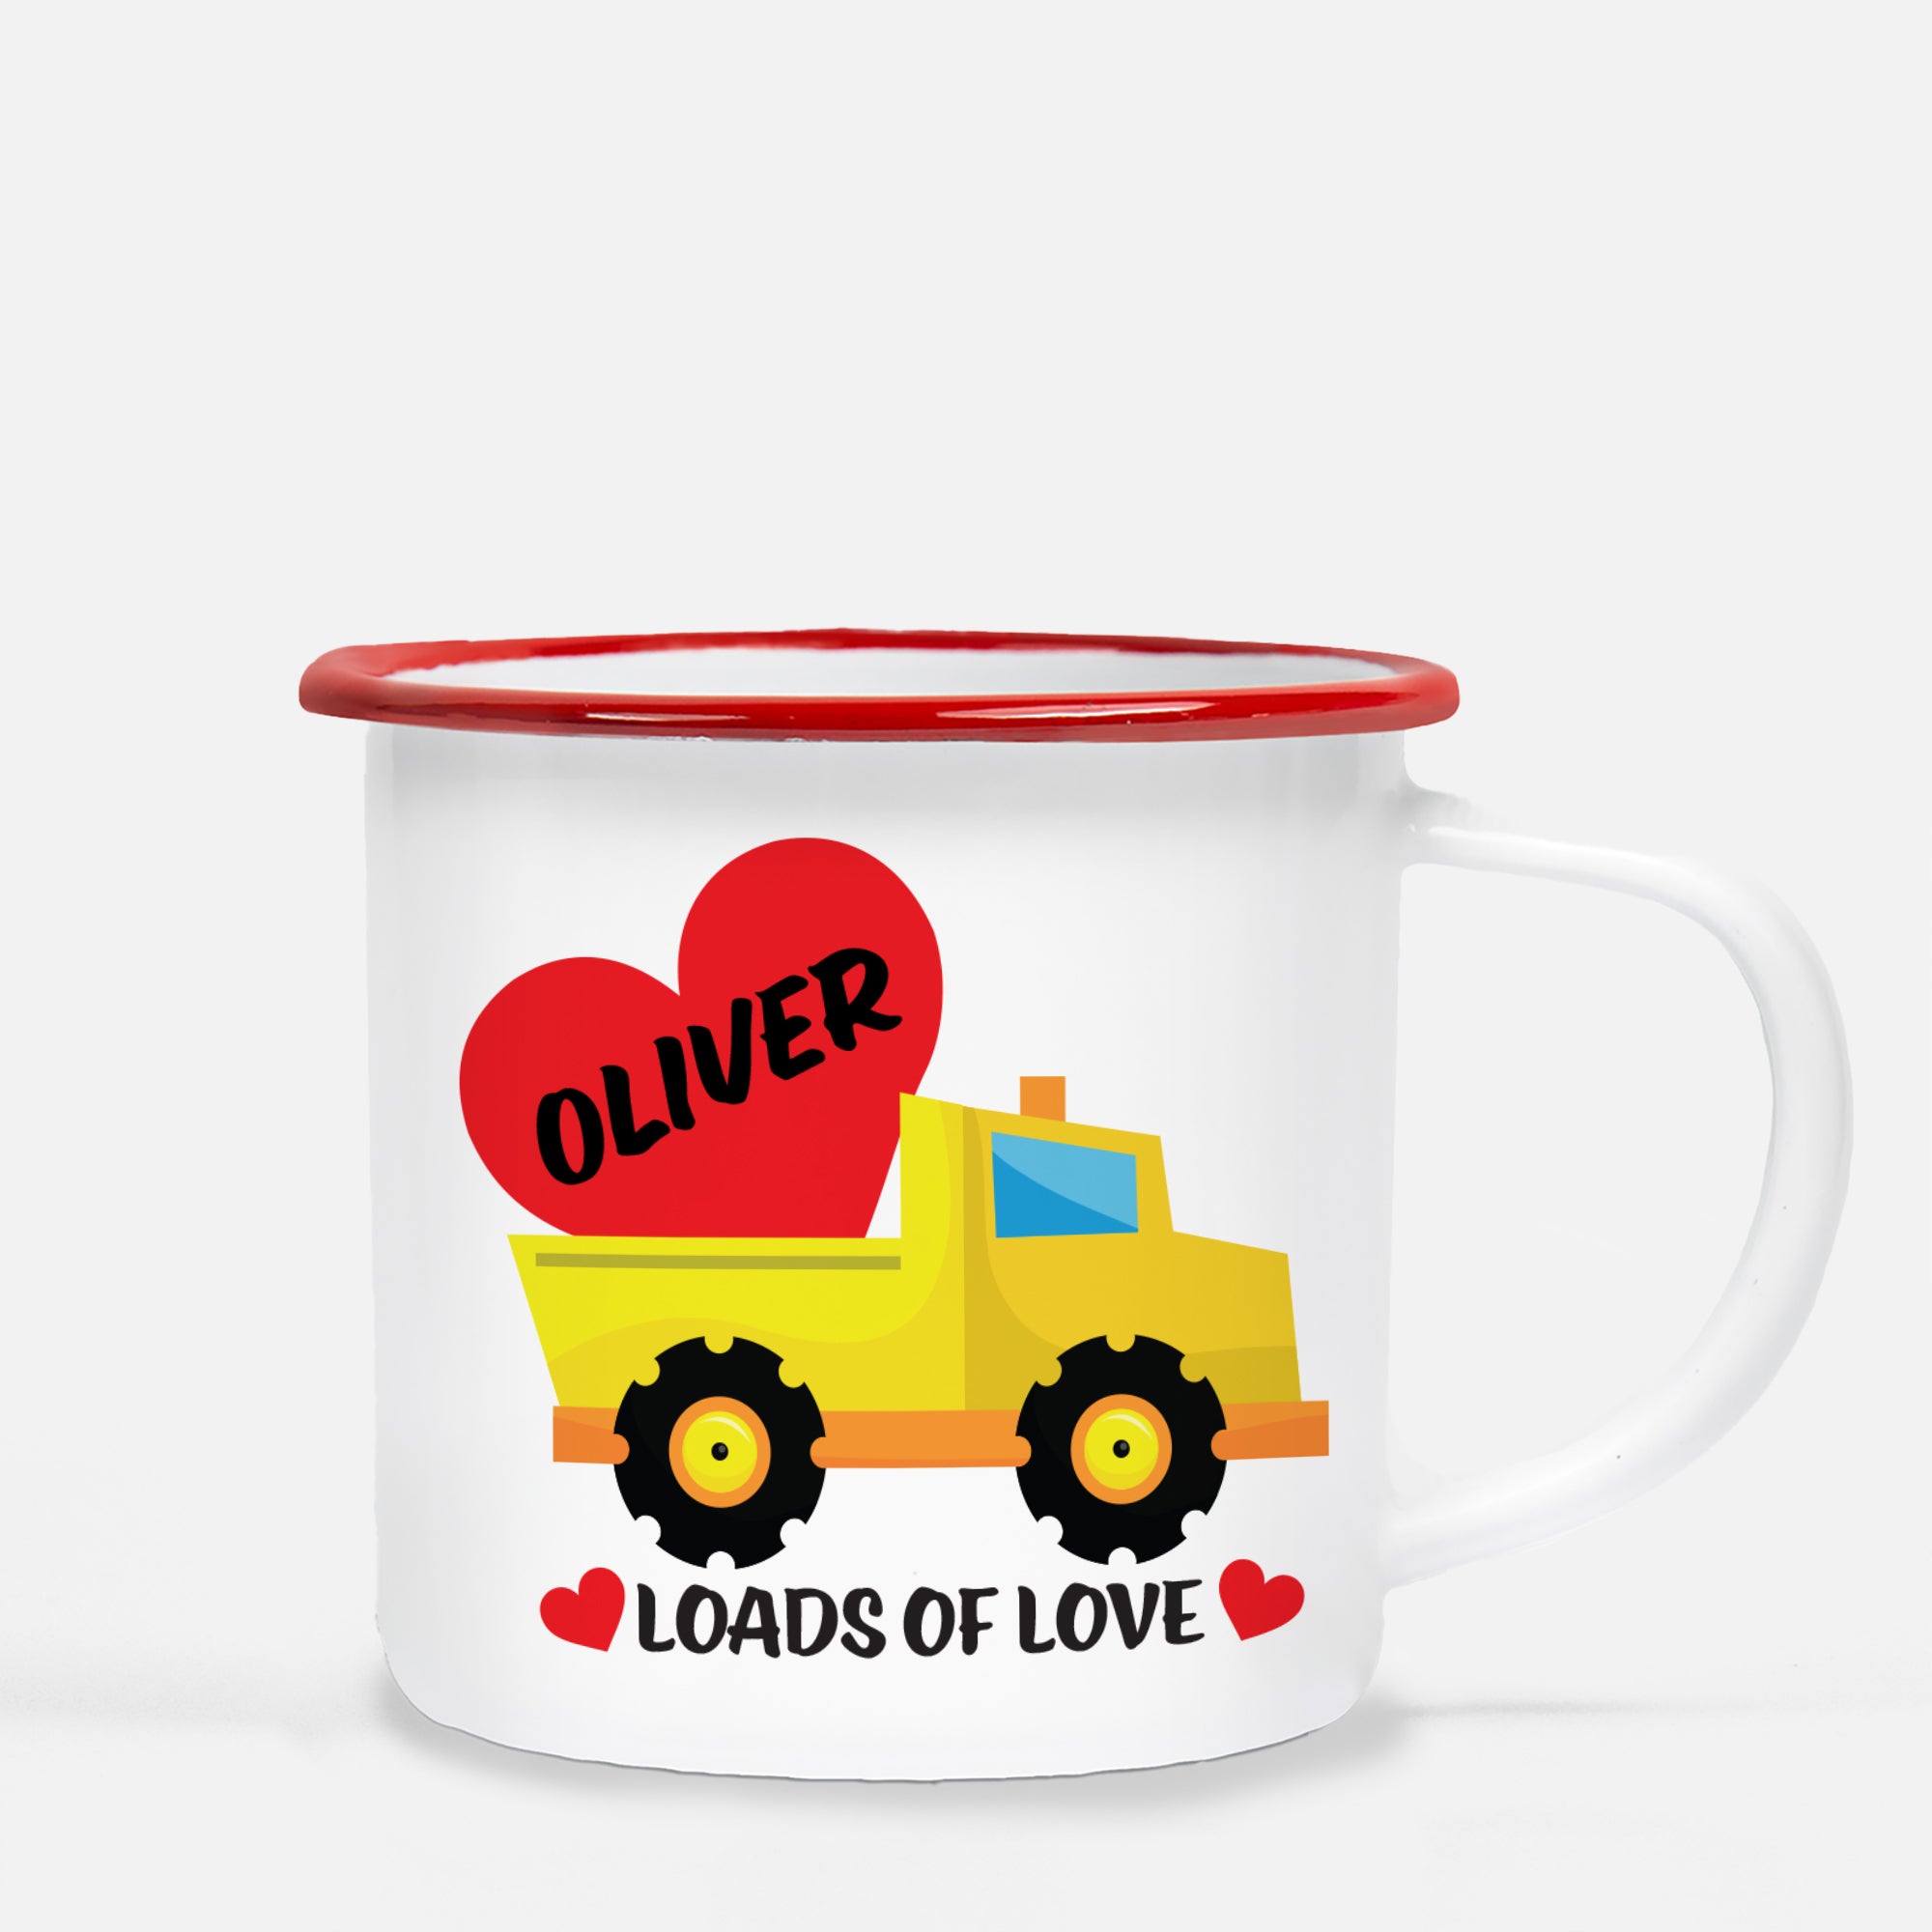 Personalized Camp Mug - white ceramic 12 oz metal mug  with red lip | Great for kids | yellow and orange dump truck | Valentine's Day gift | Loads of love